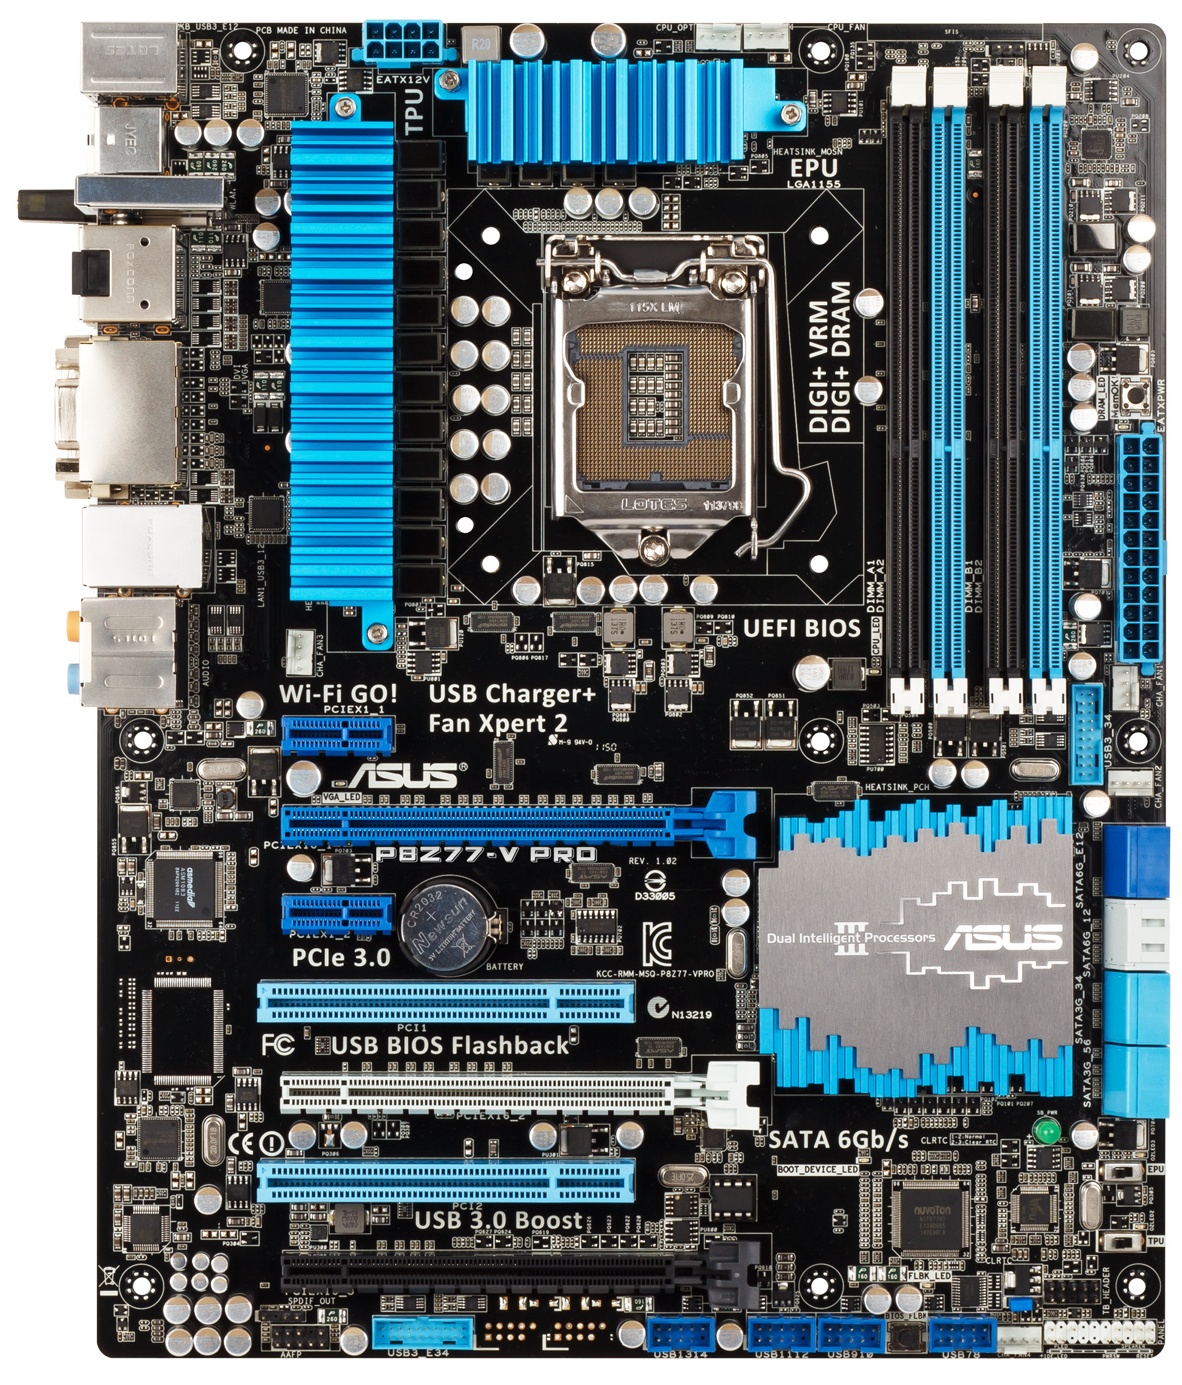 Asus P8z77 V Pro Overview Visual Inspection And Board Features Intel Z77 Motherboard Review With Ivy Bridge Asrock Asus Gigabyte And Msi